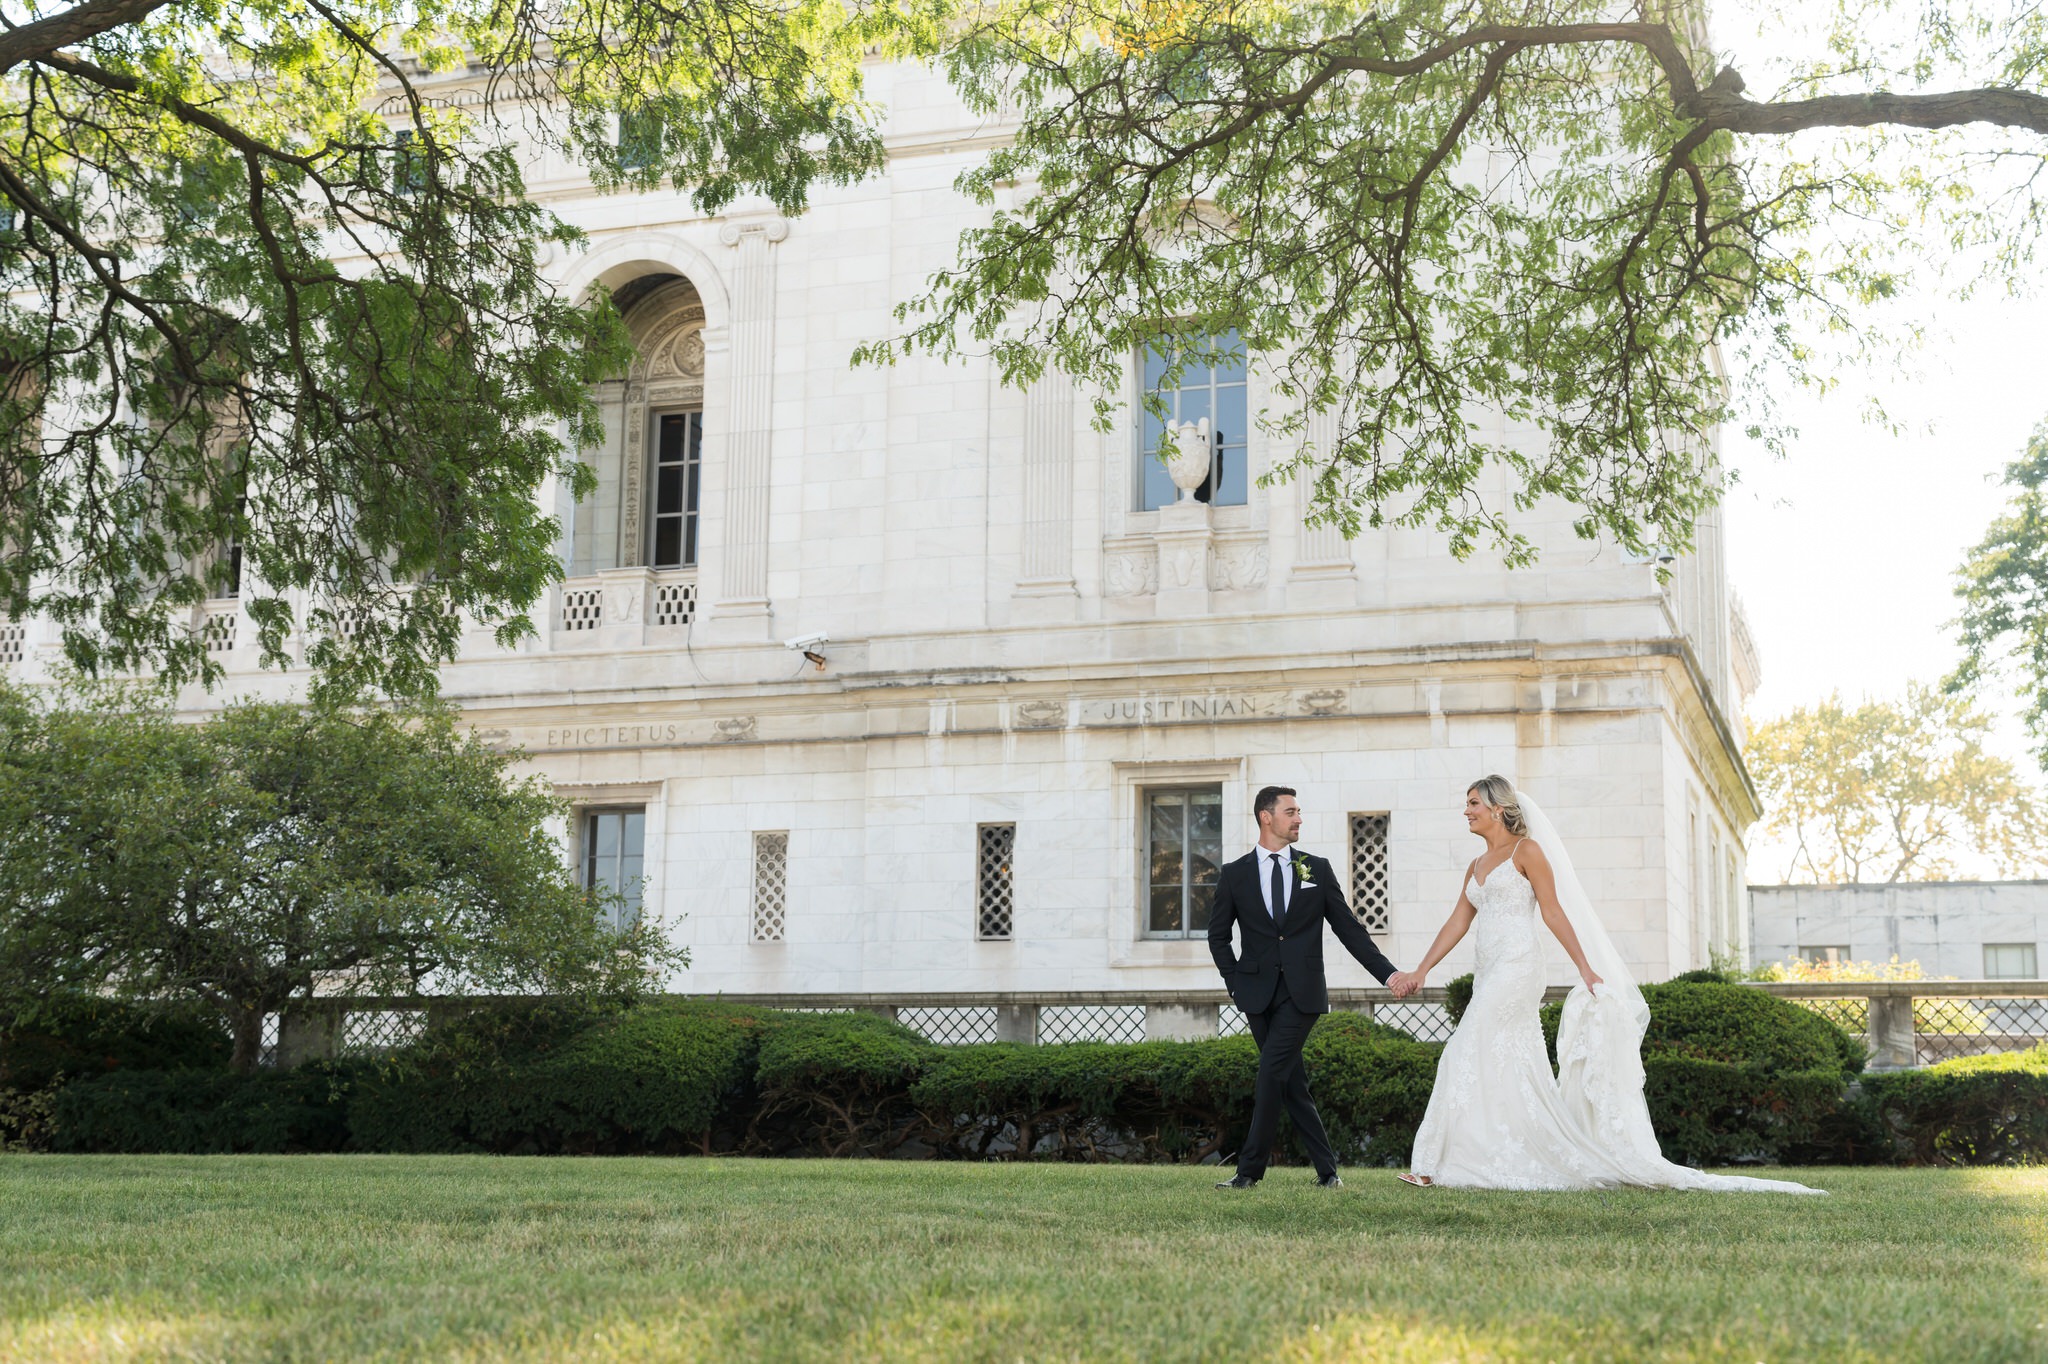 A bride and groom hold hands and walk across the grass at the Detroit Public Library on their wedding day.  